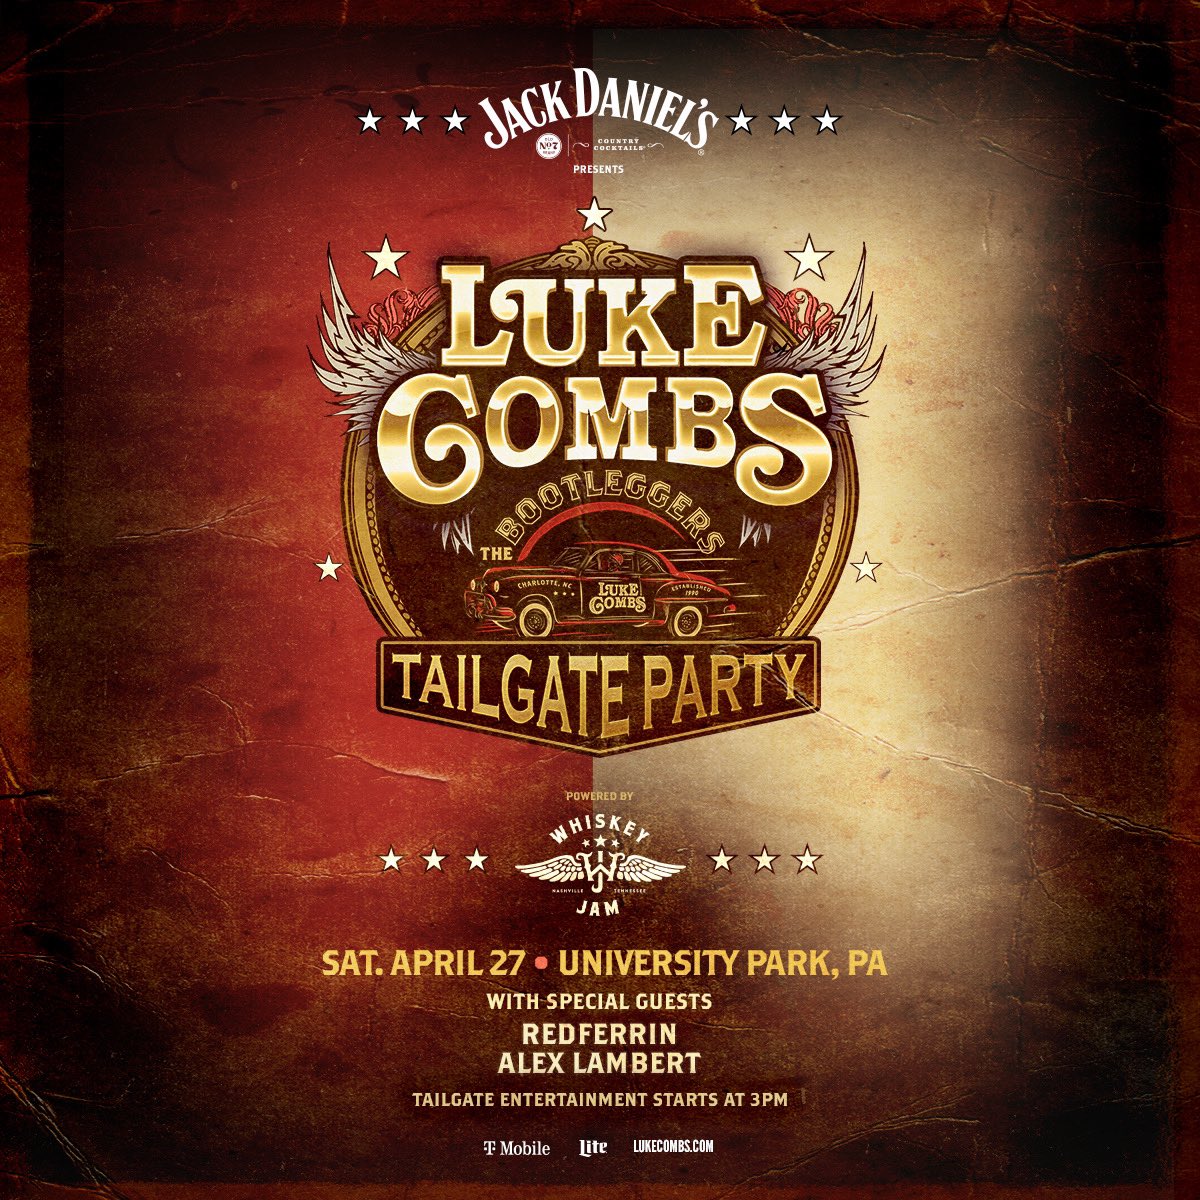 I’m heading to University Park, PA on Saturday, April 27th for the Whiskey Jam Tailgate with @LukeCombs 🔥🔥🔥 See y’all soon 🙏🏼🙏🏼🙏🏼 lukecombs.com/tailgates/